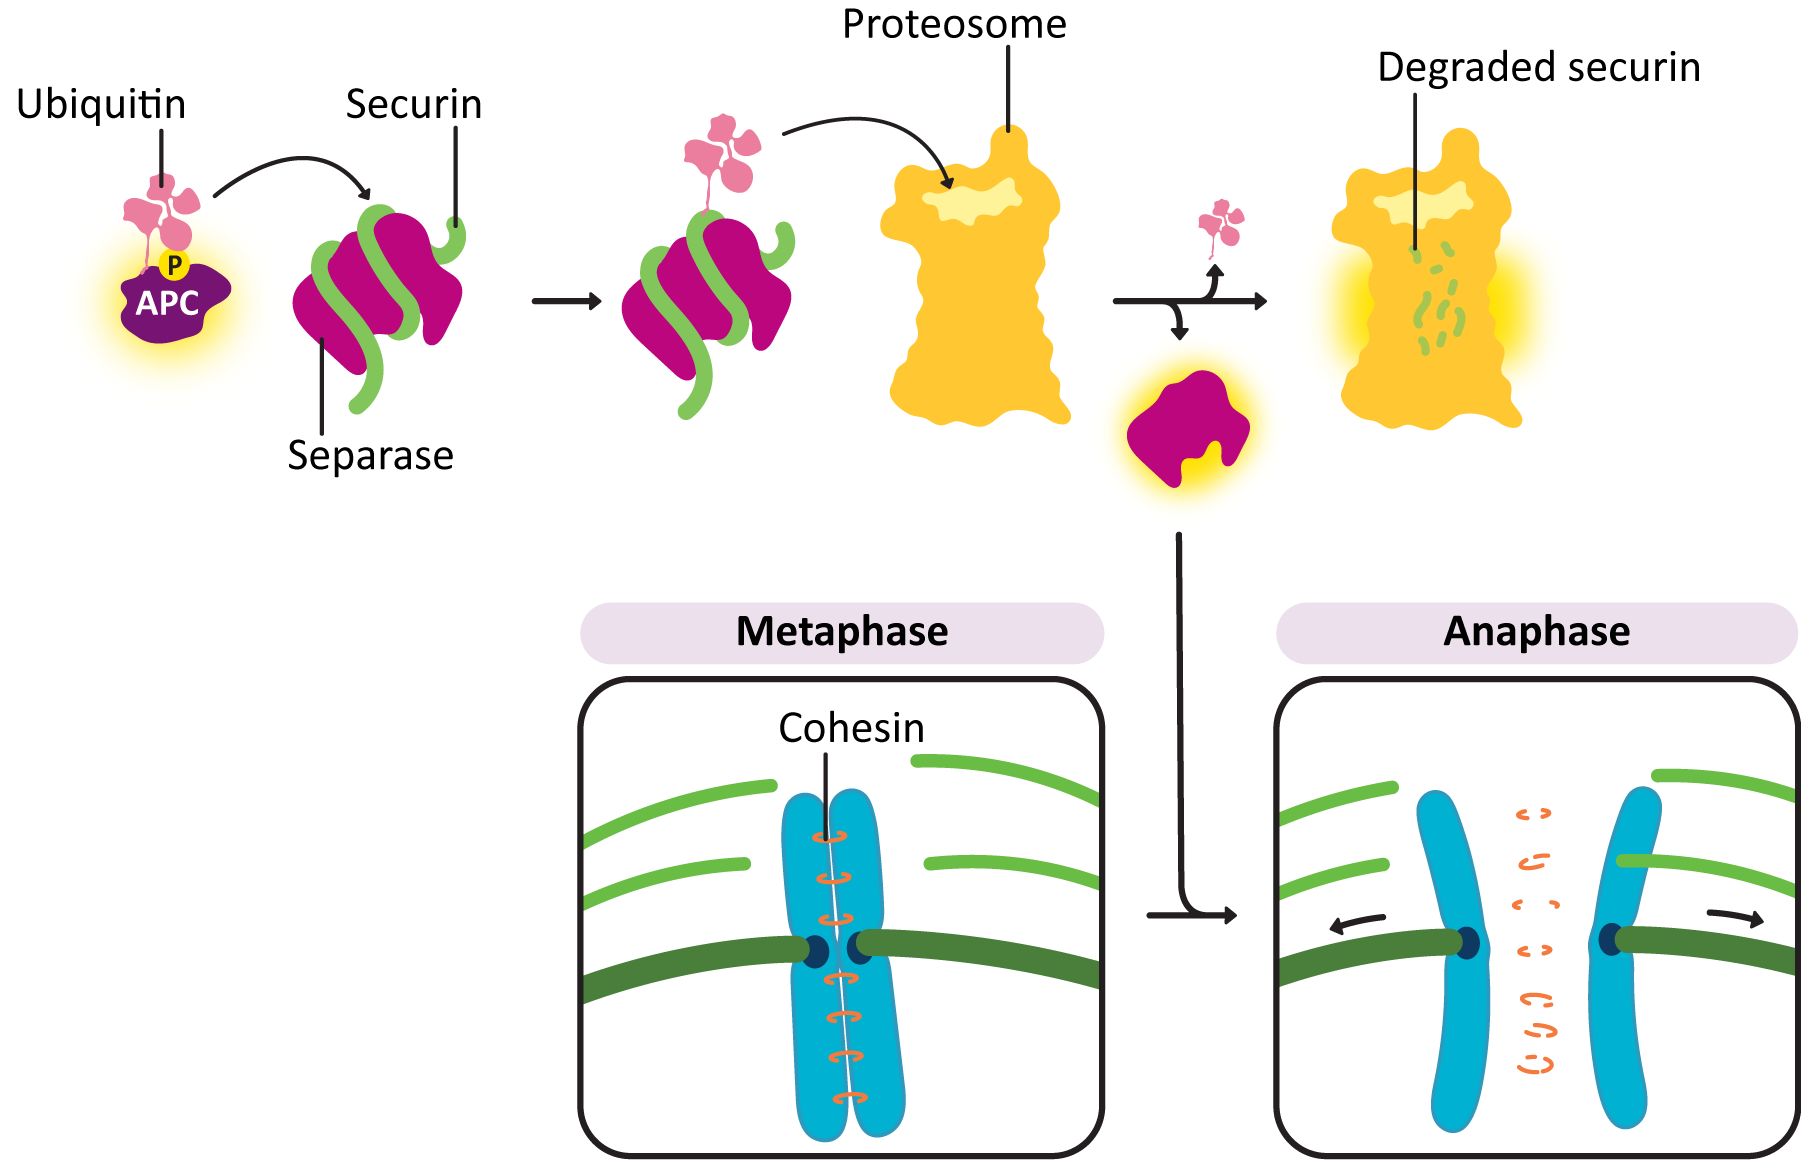 mechanism of anaphase promoting complex initiating anaphase